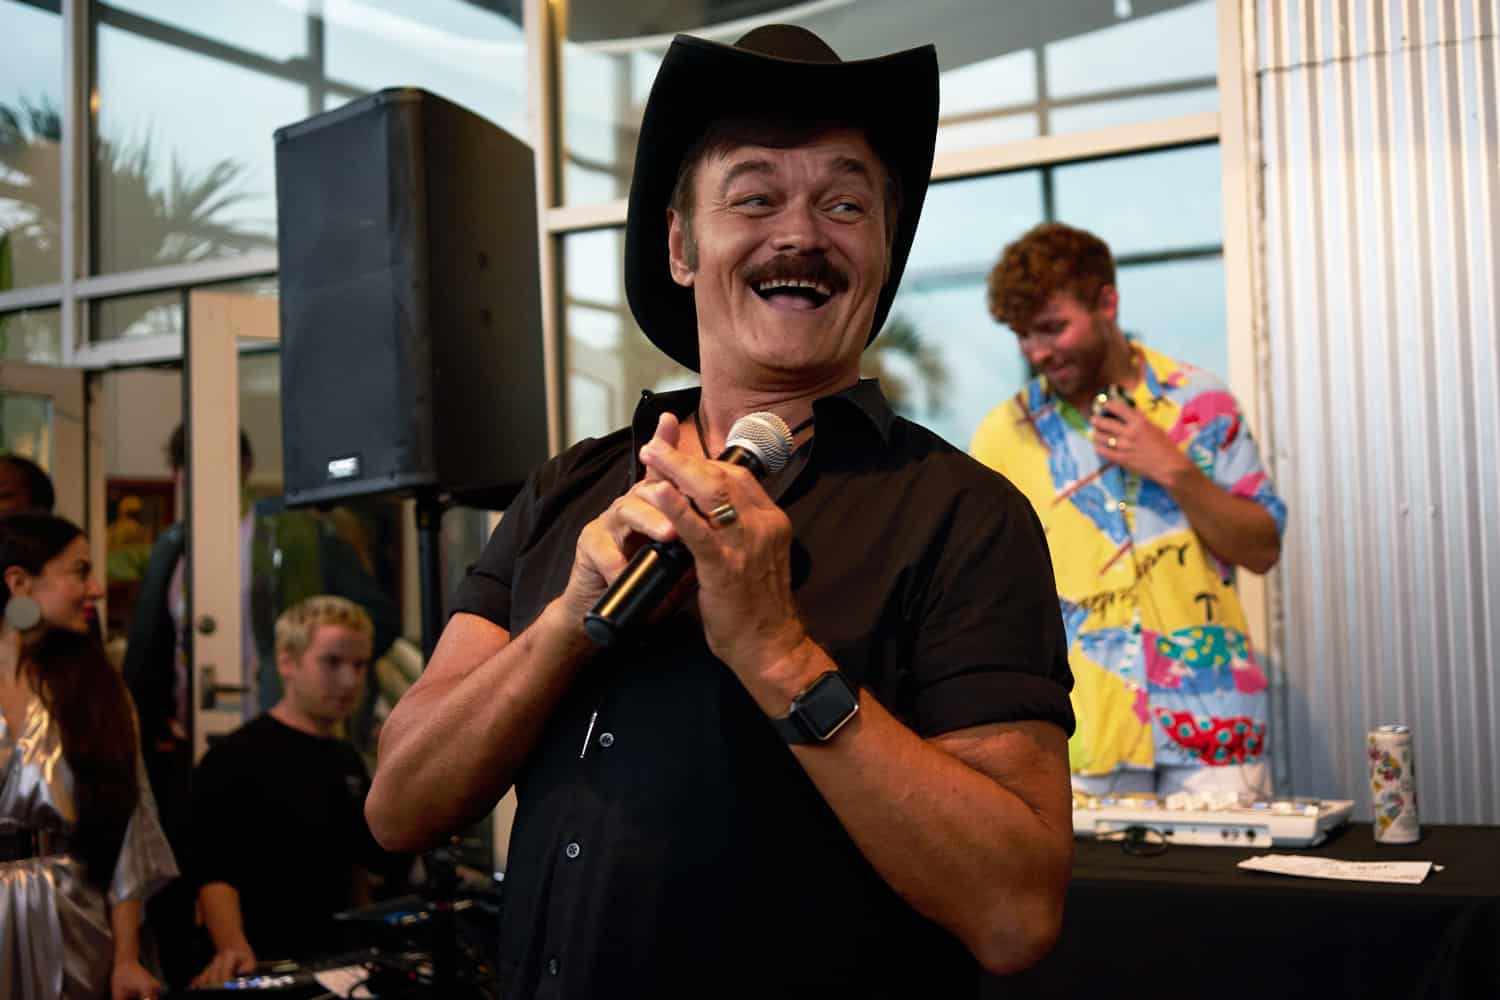 Randy Jones singing into a microphone in front of a DJ